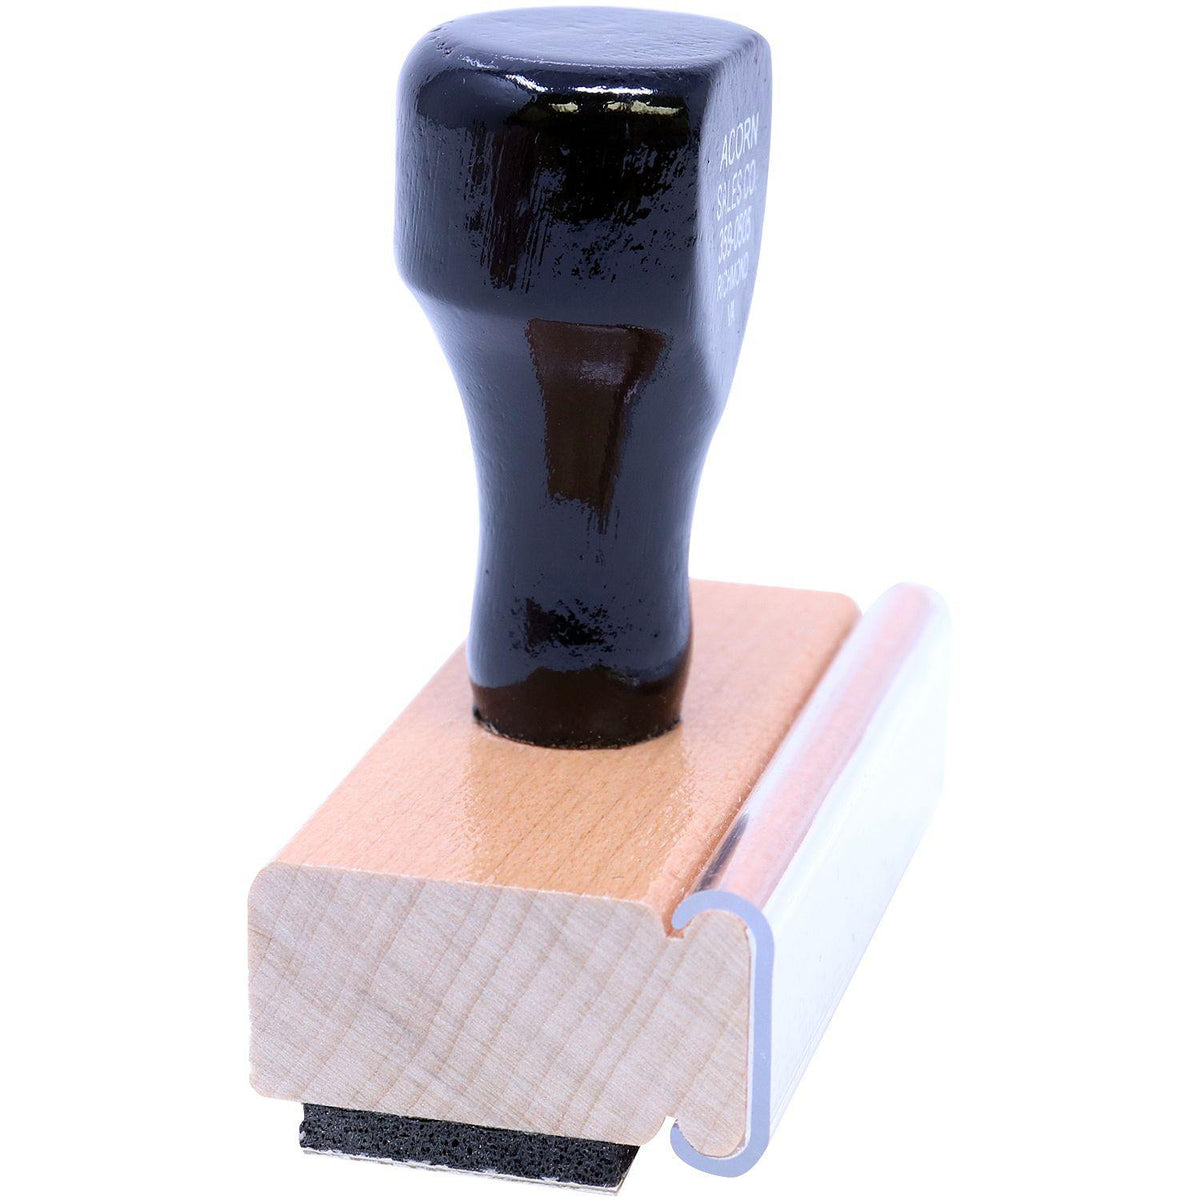 Rush Rubber Stamp - Engineer Seal Stamps - Brand_Acorn, Impression Size_Small, Stamp Type_Regular Stamp, Type of Use_Postal &amp; Mailing, Type of Use_Shipping &amp; Receiving